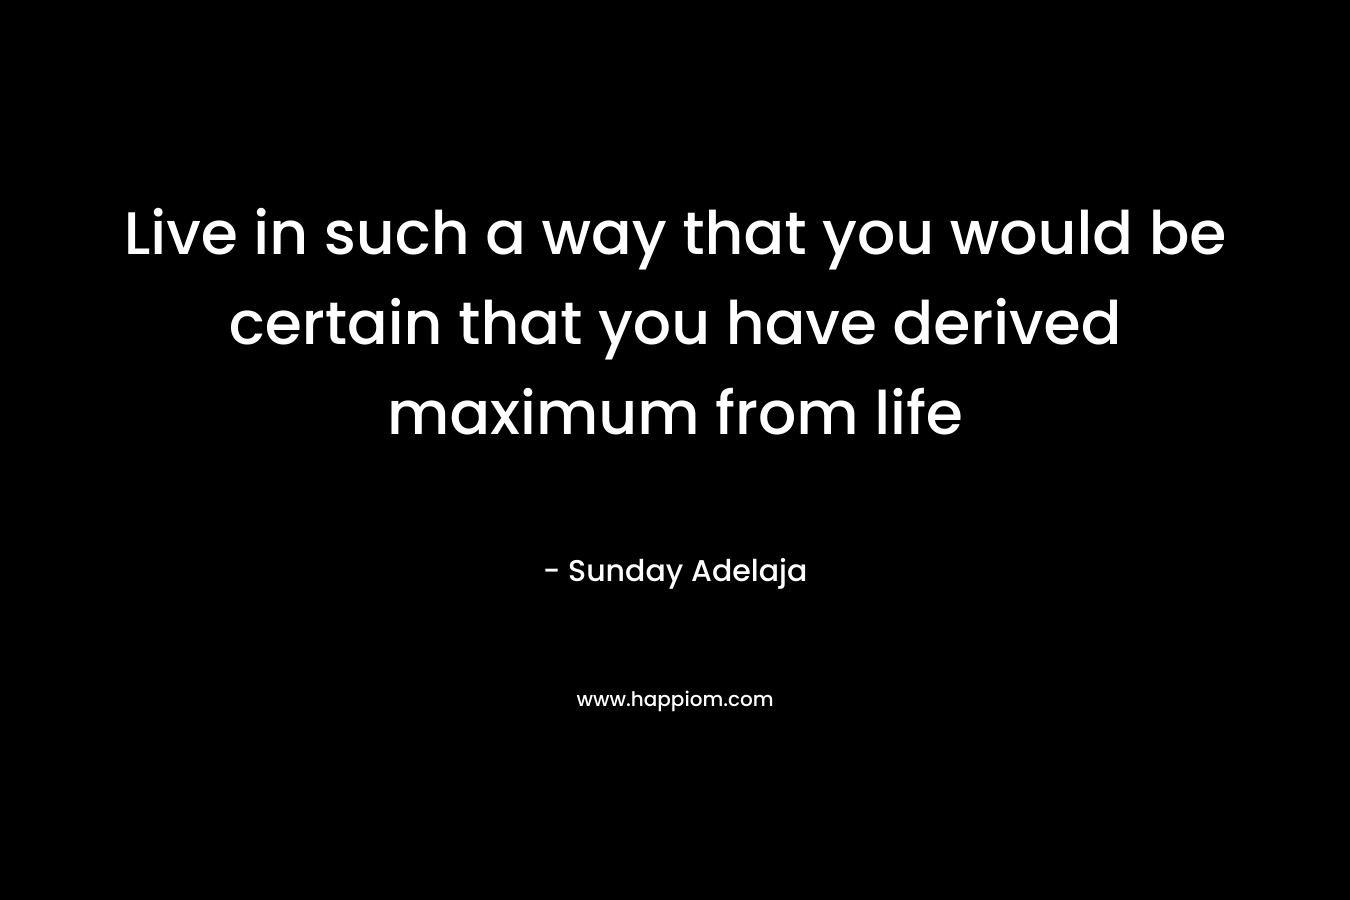 Live in such a way that you would be certain that you have derived maximum from life – Sunday Adelaja